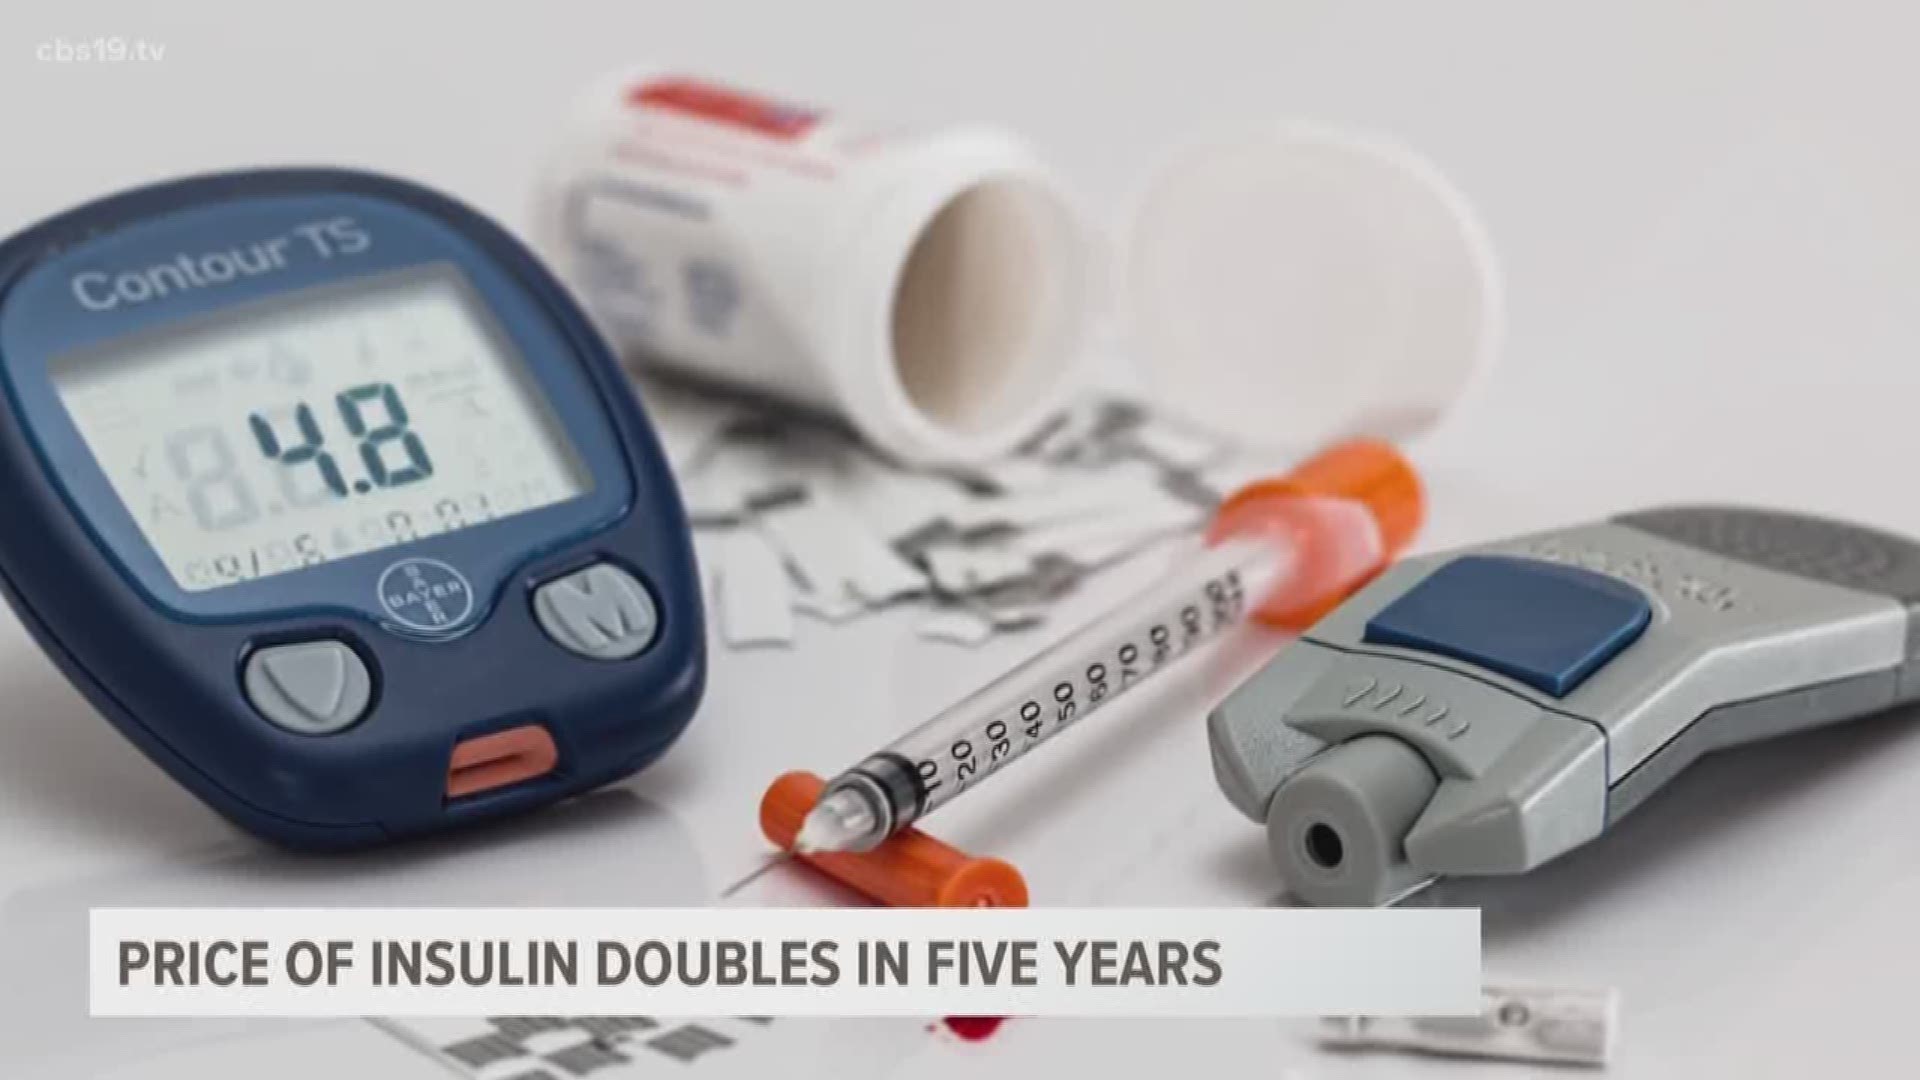 January is considered the most expensive time of the year to purchase insulin, because most insurance companies reset deductibles to zero at the beginning of the year. That coupled with the rising prices of insulin could easily put patients who are already on a tight income between health and a hard place.